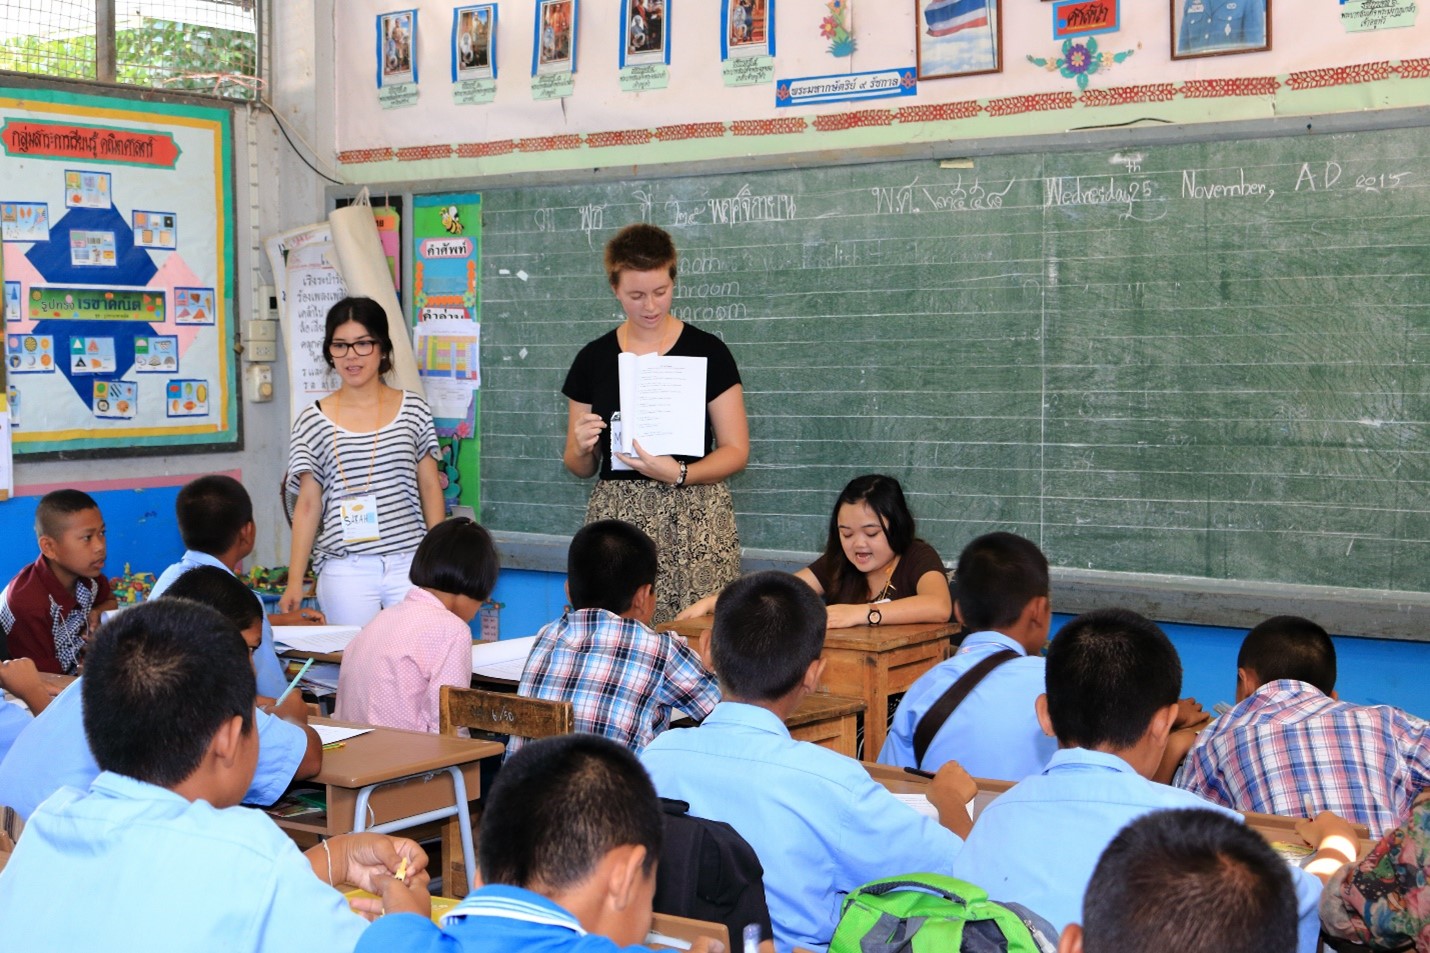 Photo of two teachers and students in a classroom setting